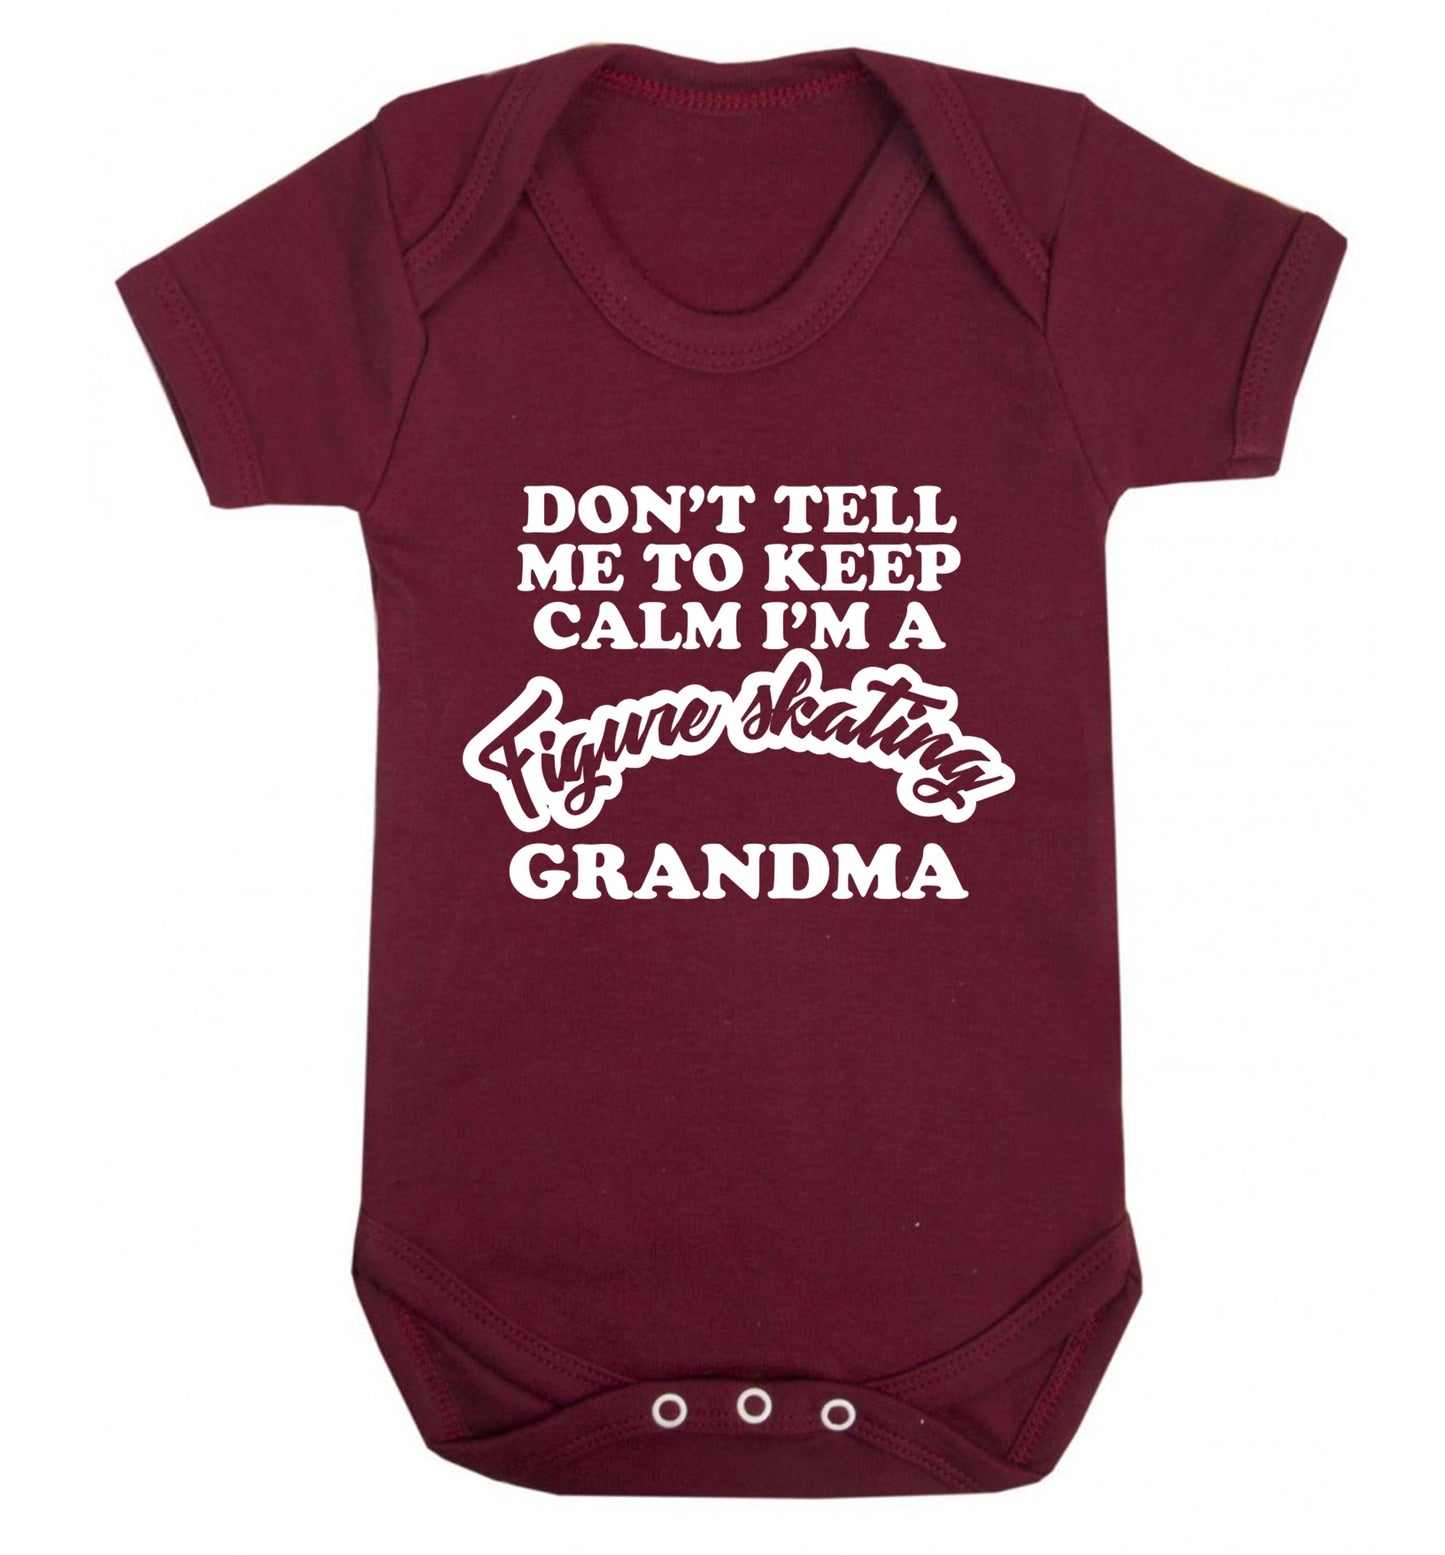 Don't tell me to keep calm I'm a figure skating grandma Baby Vest maroon 18-24 months